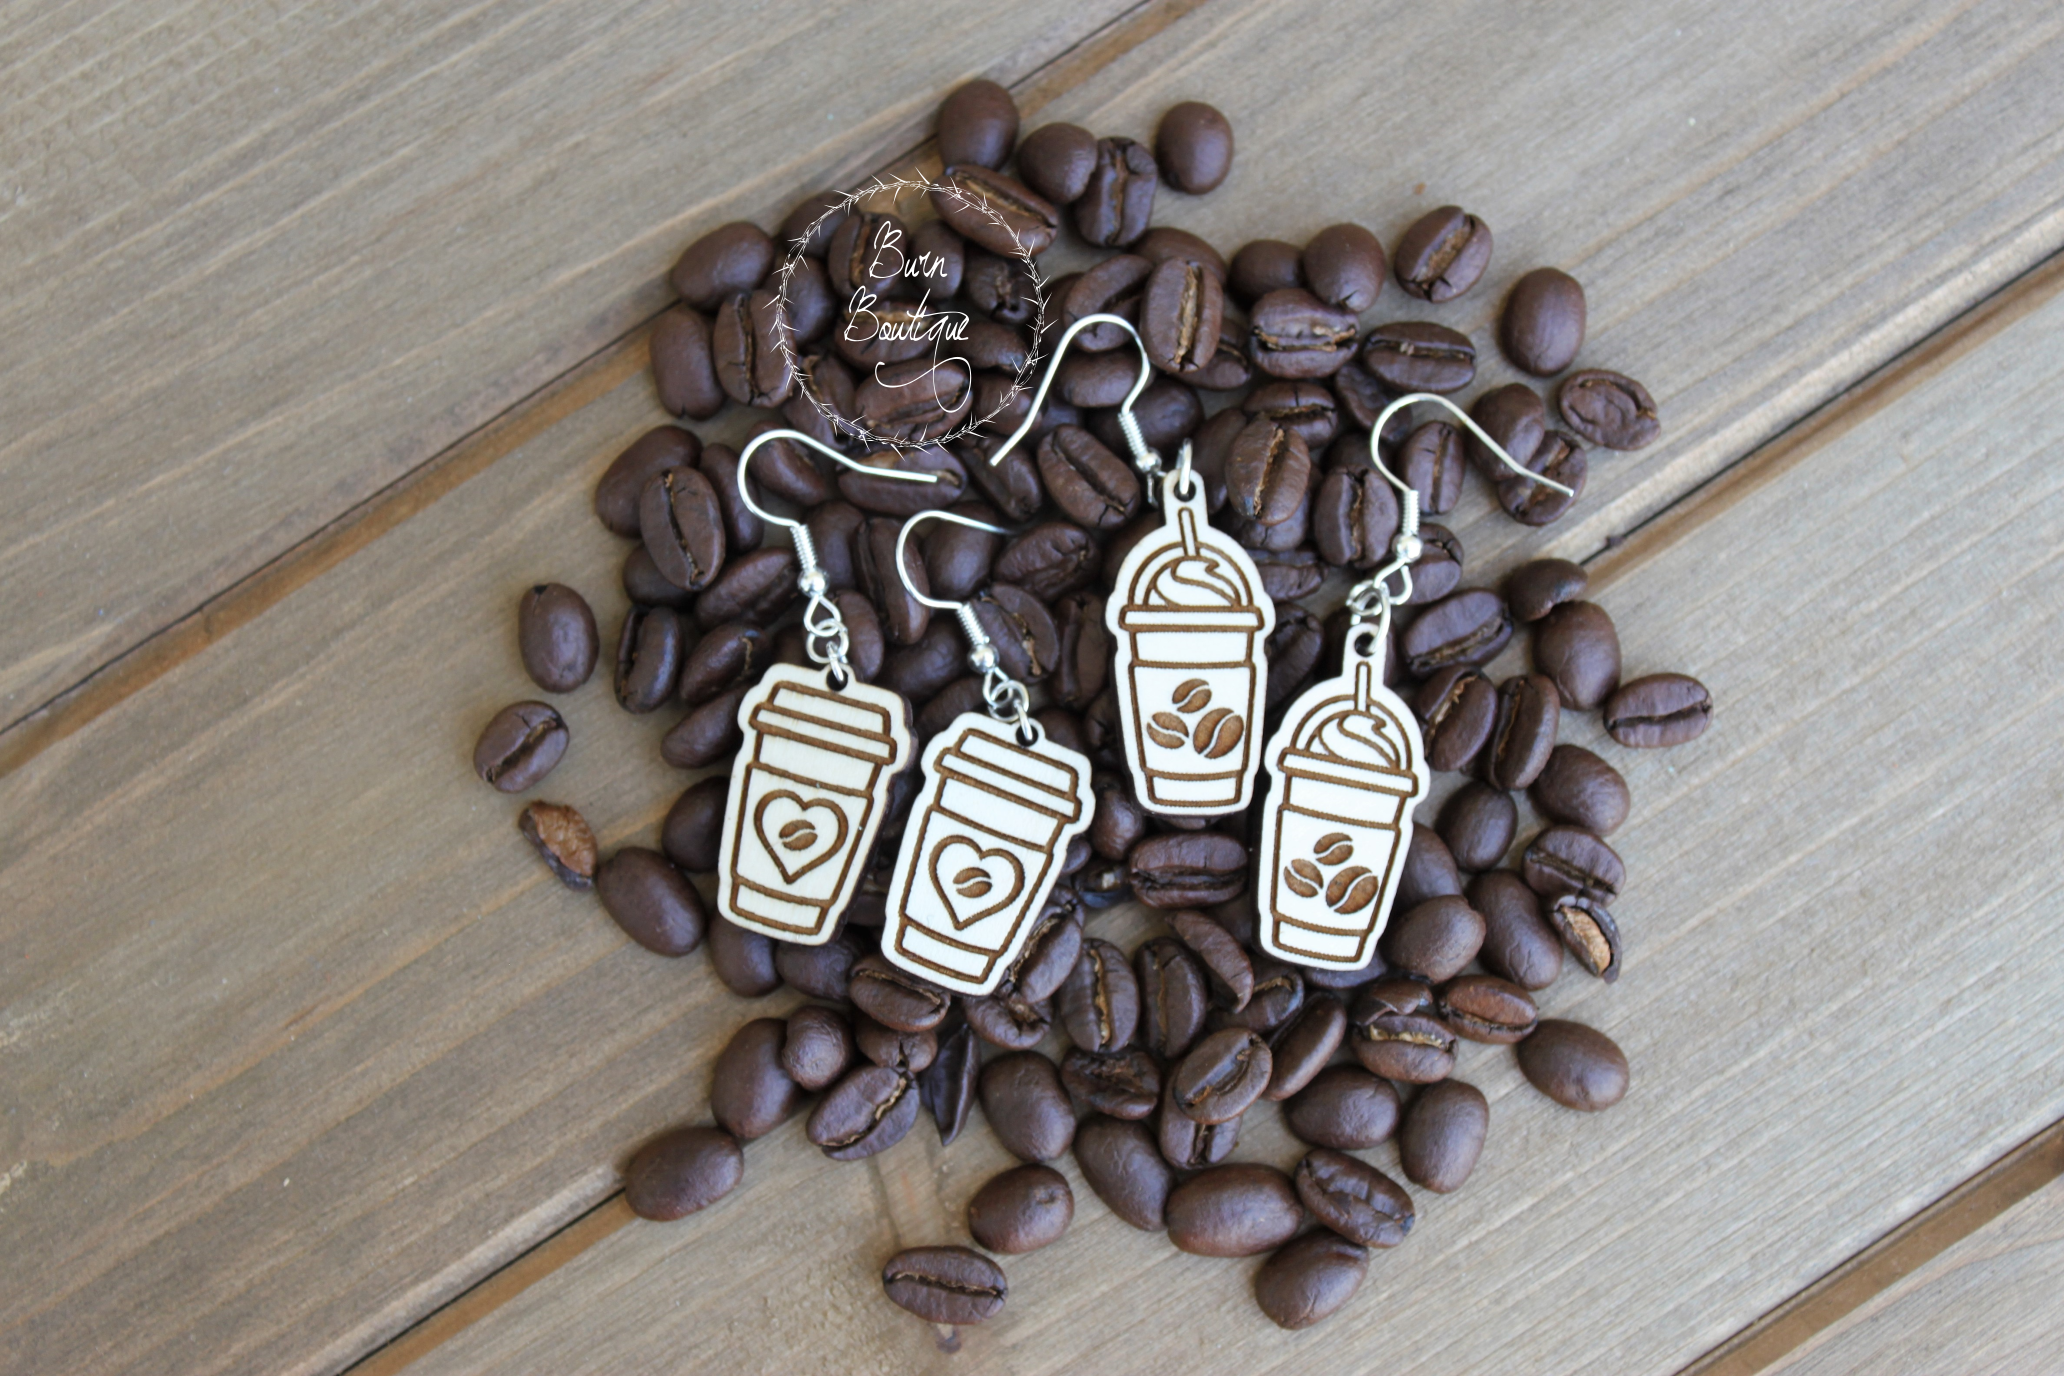 Handmade Wooden Coffee Cup Earrings, Basswood, Silver, Hot Coffee, Iced Coffee, Gifts for Her, Coffee Lover, Coffee Beans, Laser Engraved, Laser Cut